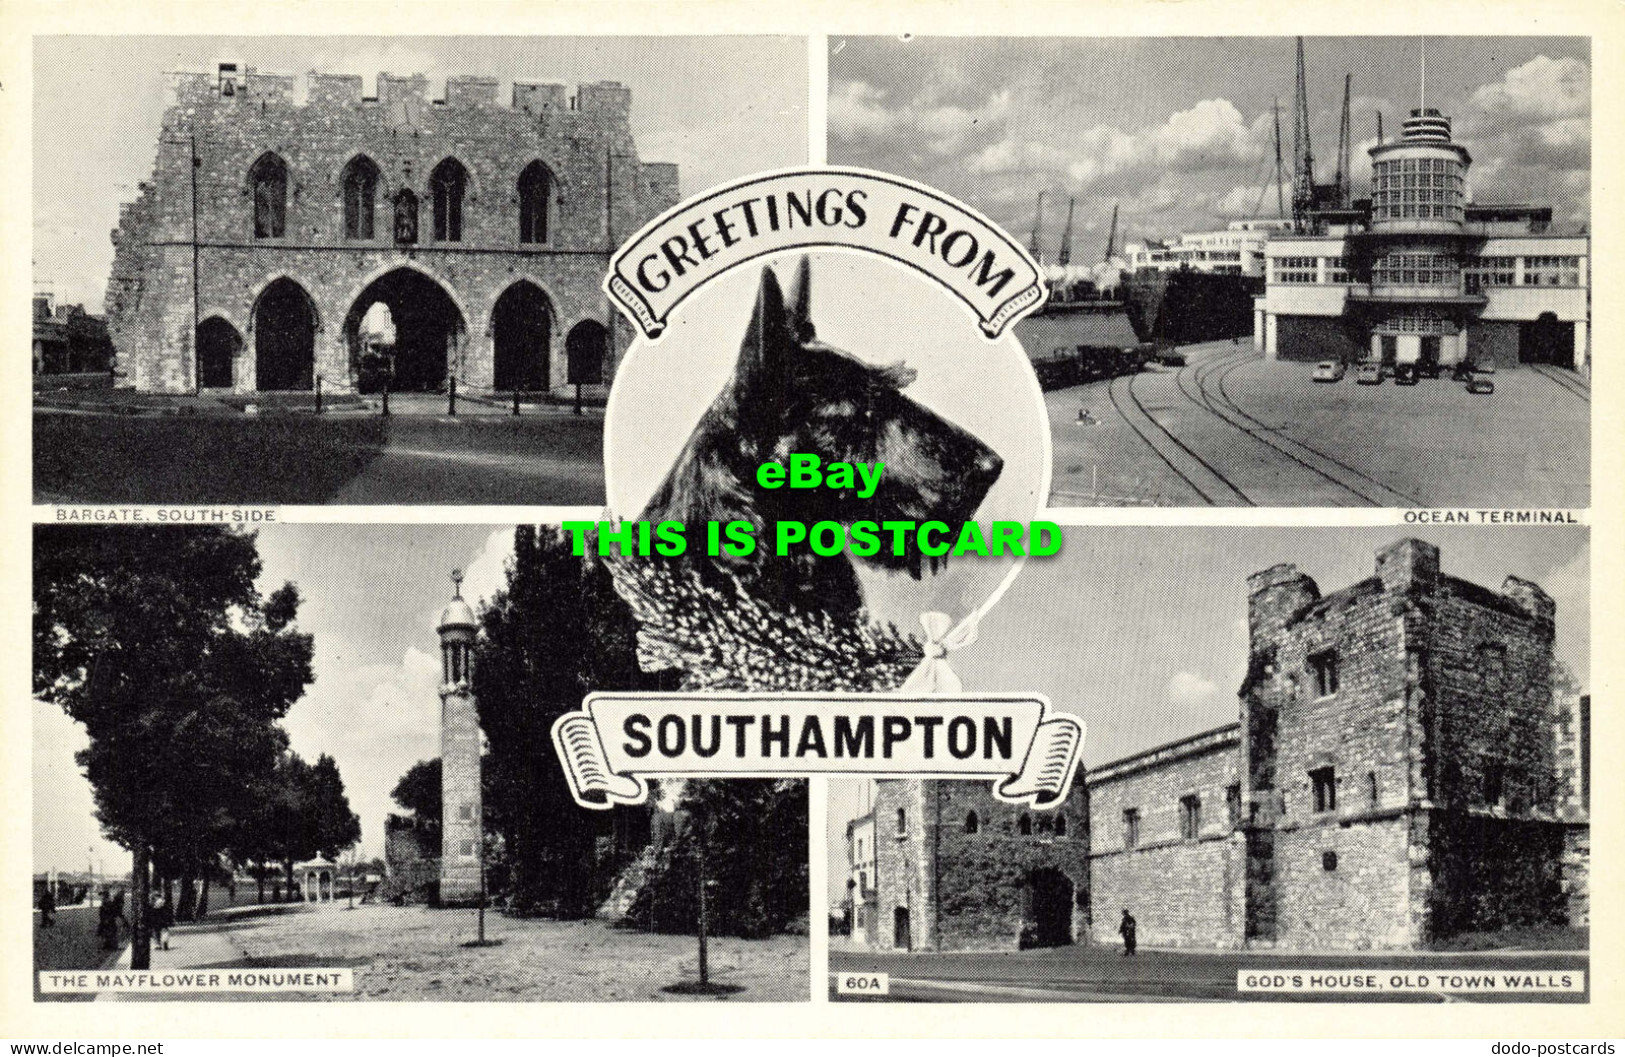 R566108 Greetings From Southampton. 60A. Multi View - World